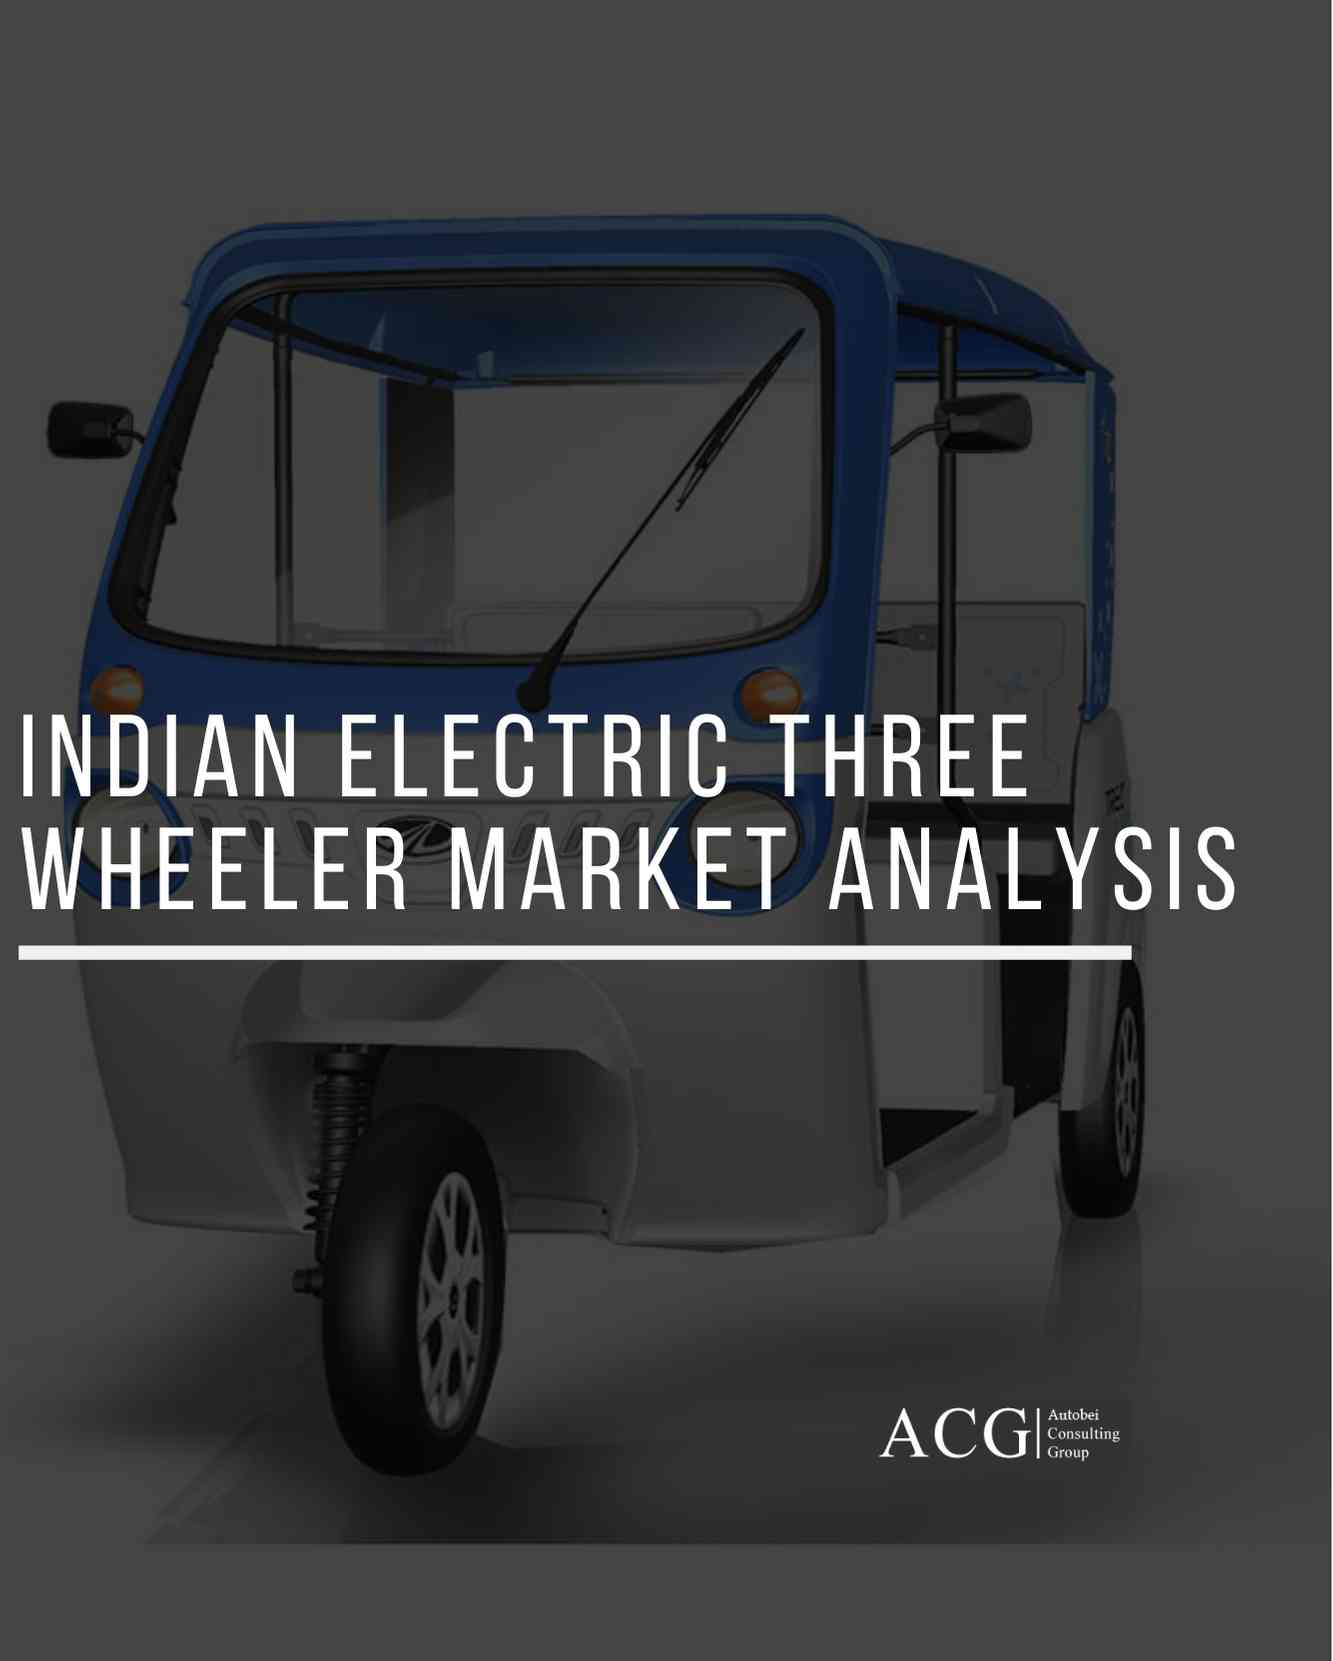 Growth Opportunities in India’s Electric Three Wheeler Market